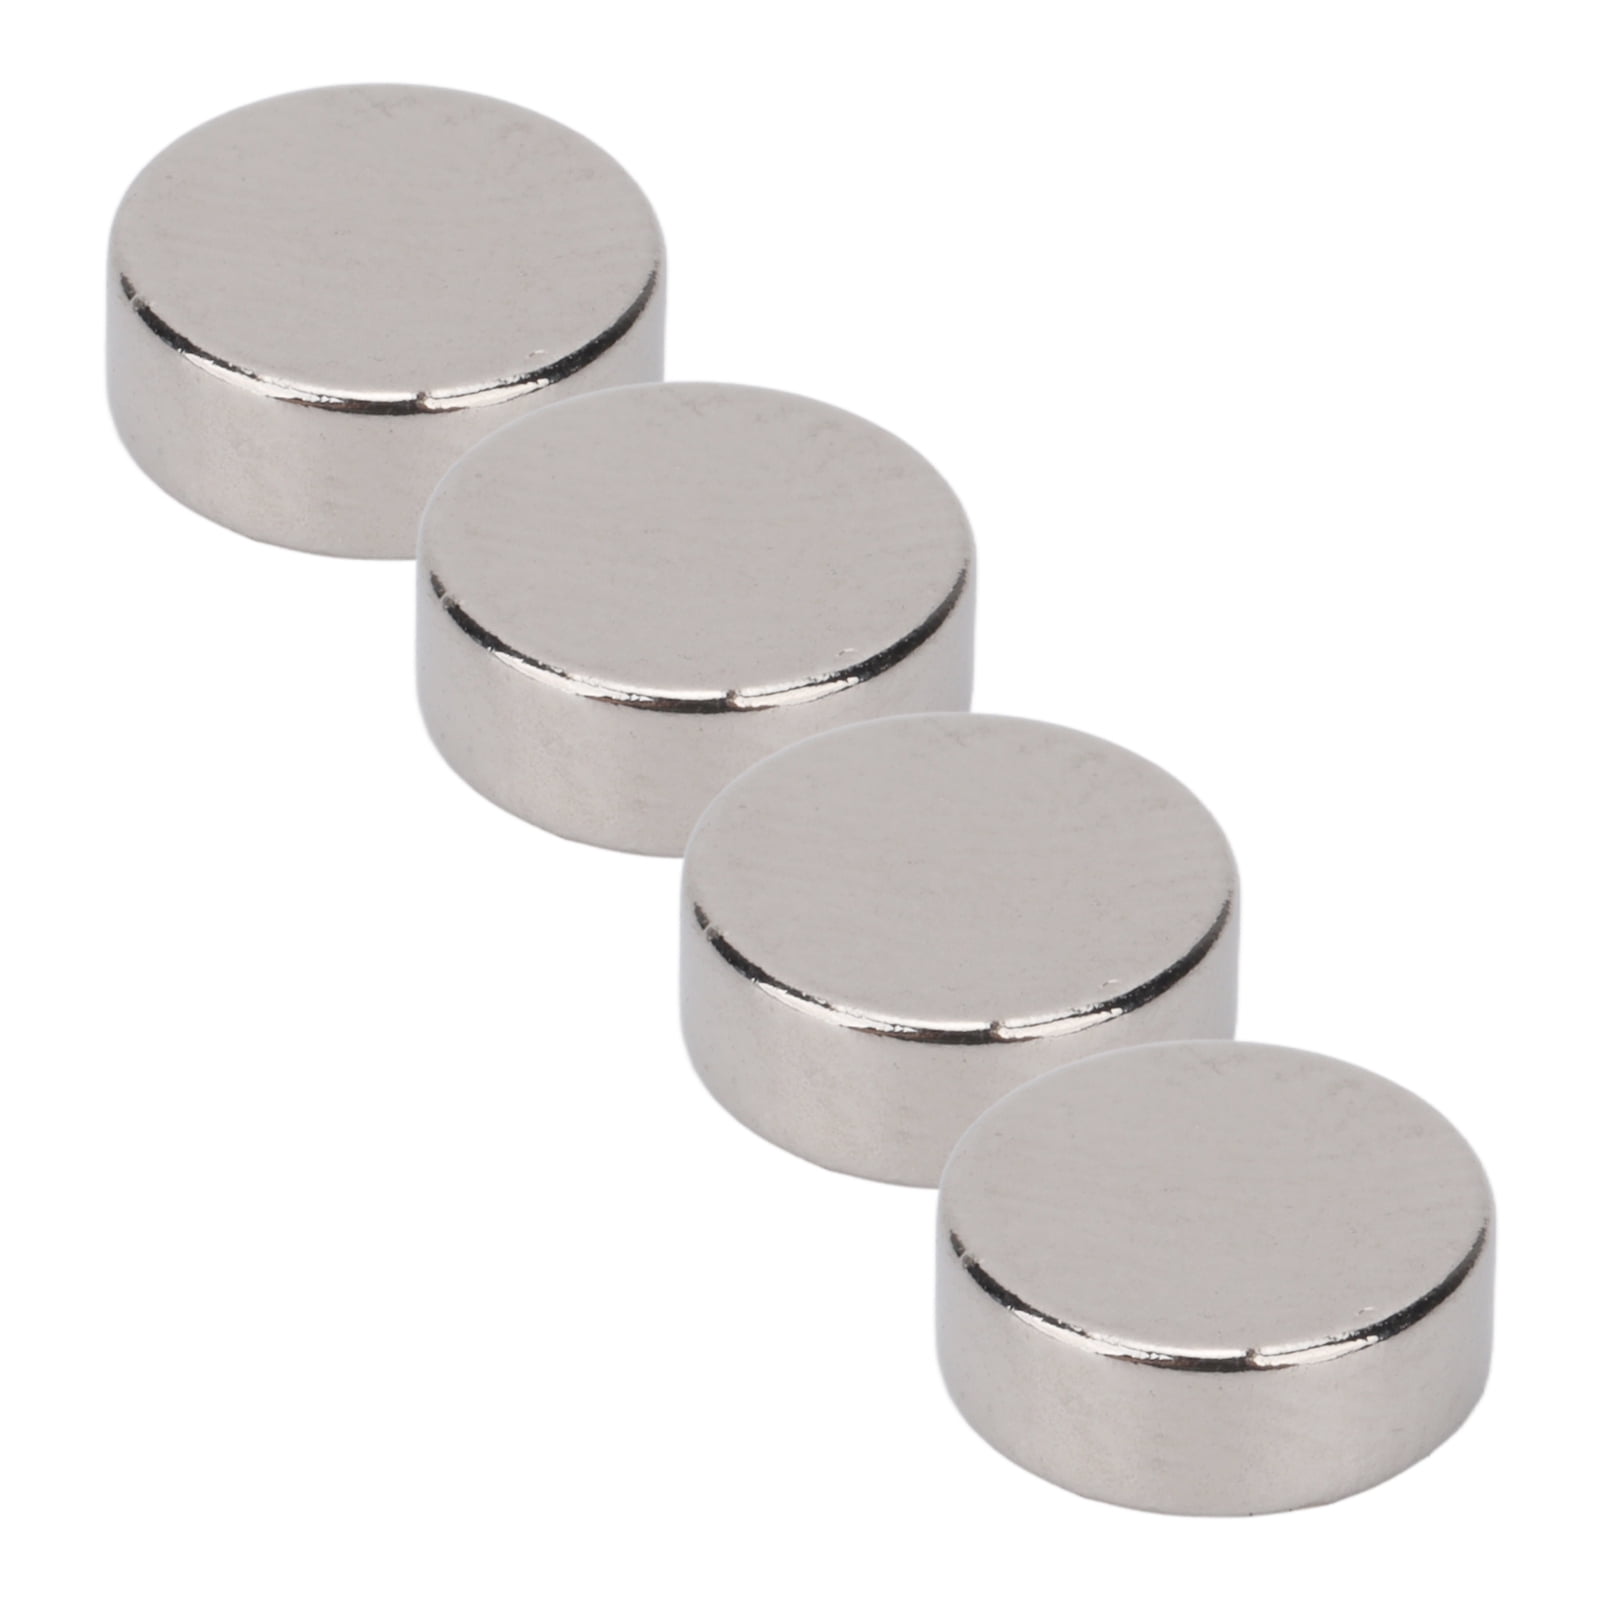 Industrial Magnets, Round 100PCS Super Strong Neodymium Magnets